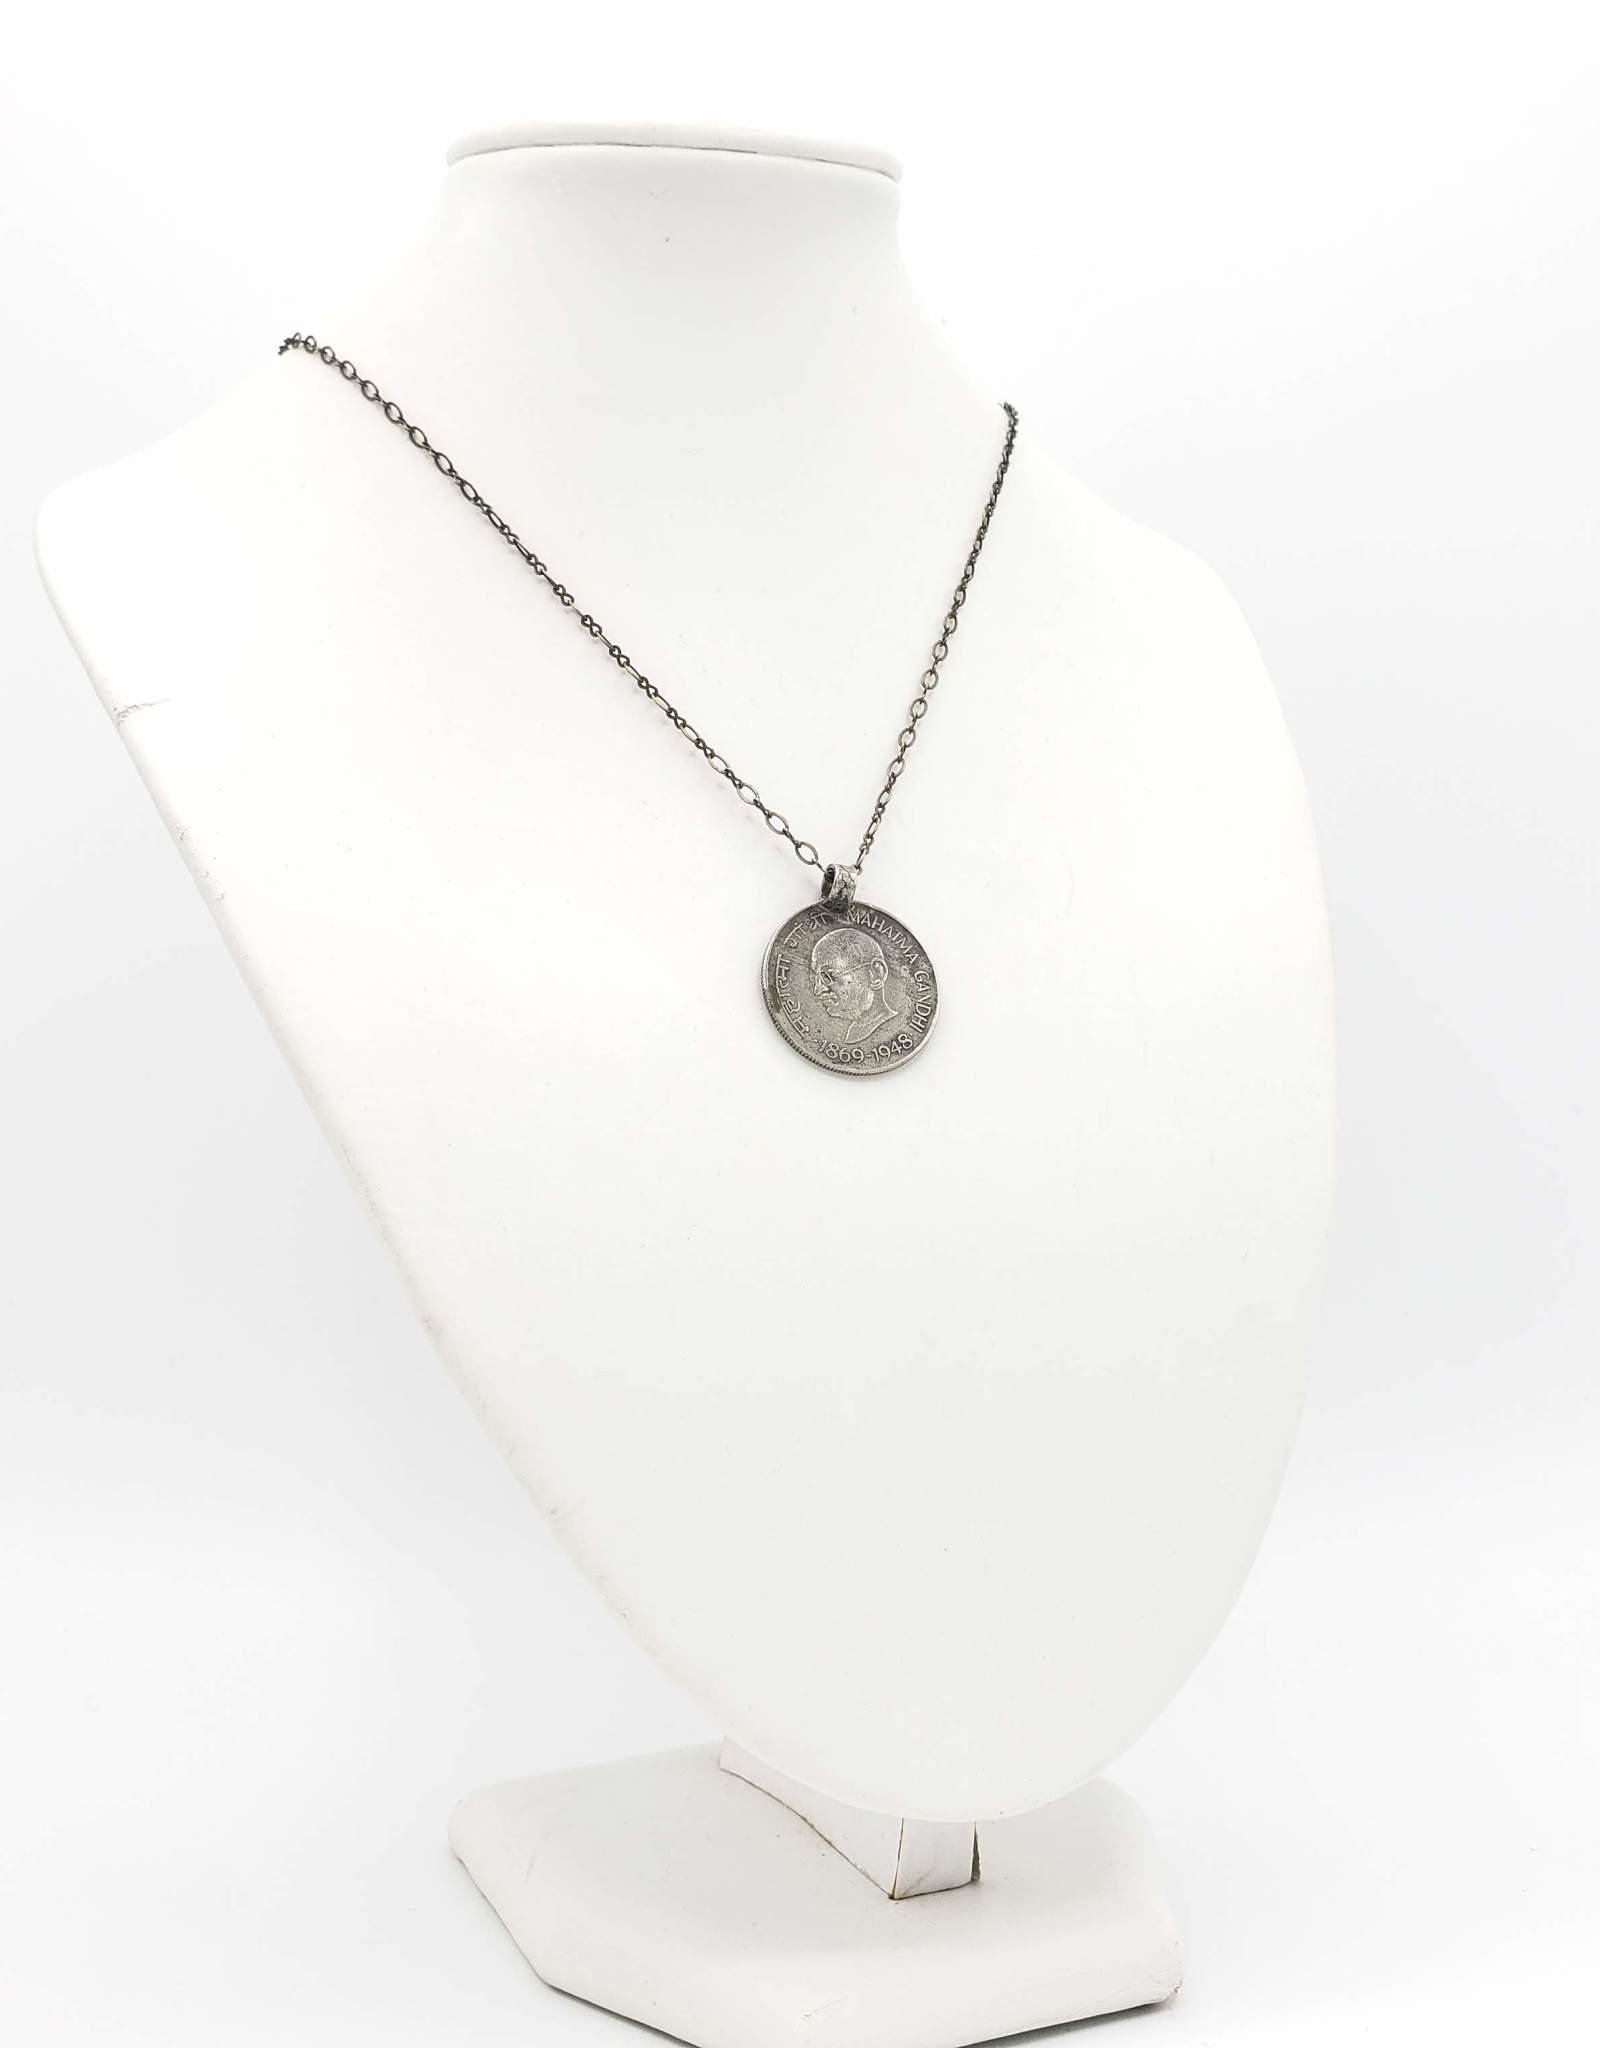 Redux Ghandi Indian Coin Necklace